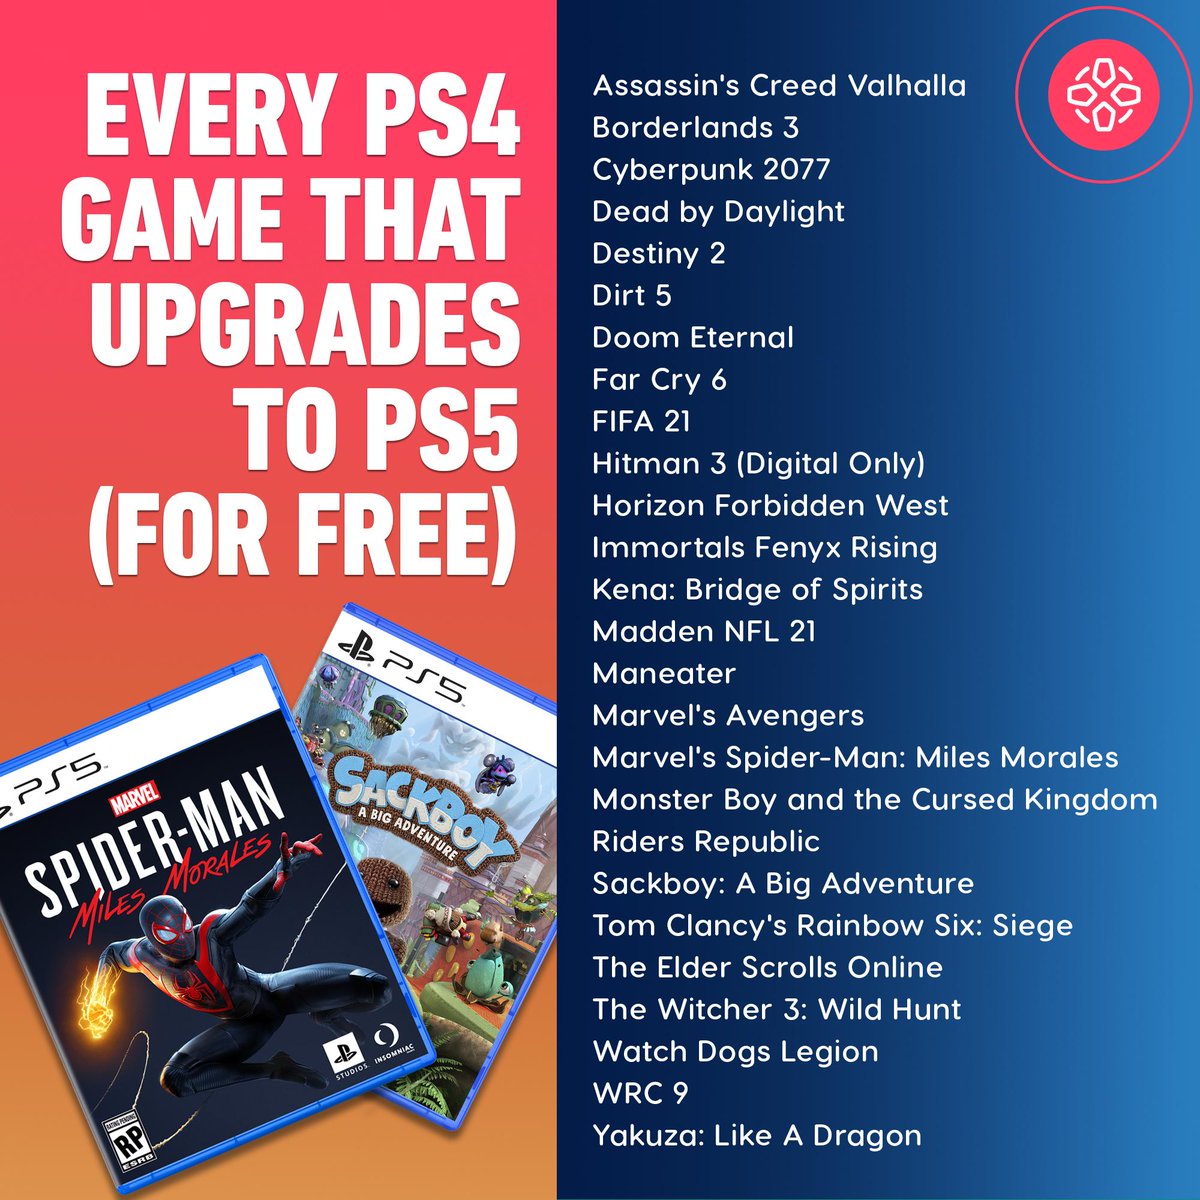 IGN on Twitter: "Just a list of the PS4 games can buy and upgrade to a digital PS5 version of the game for free. Find out how it works here: https://t.co/r8364d9X5R